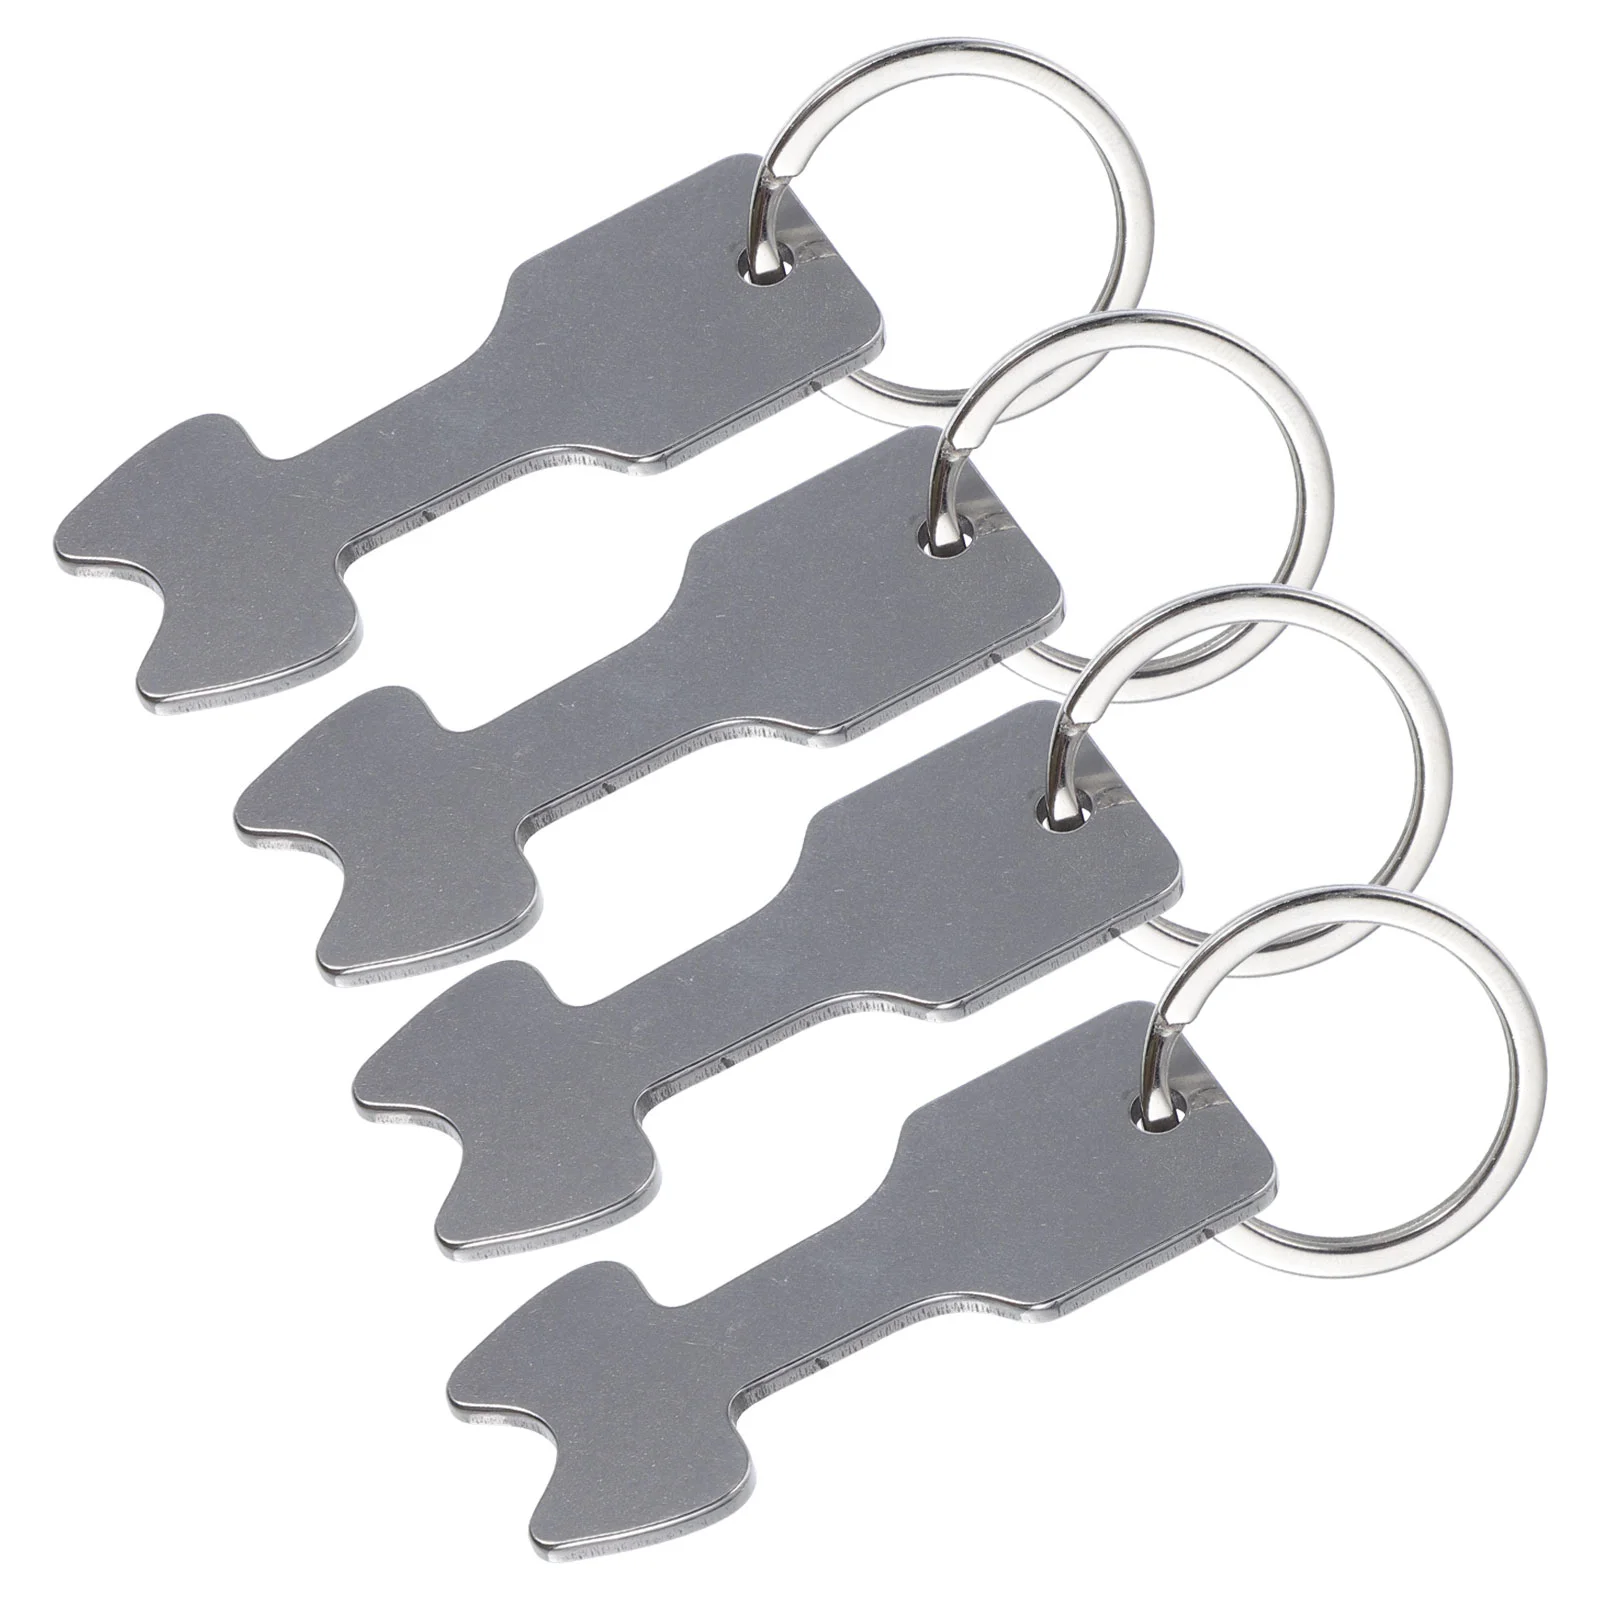 

4 Pcs Removable Keyring Carts Key Chain Key Chain Rings Trolley Token Key Rings for Trolley